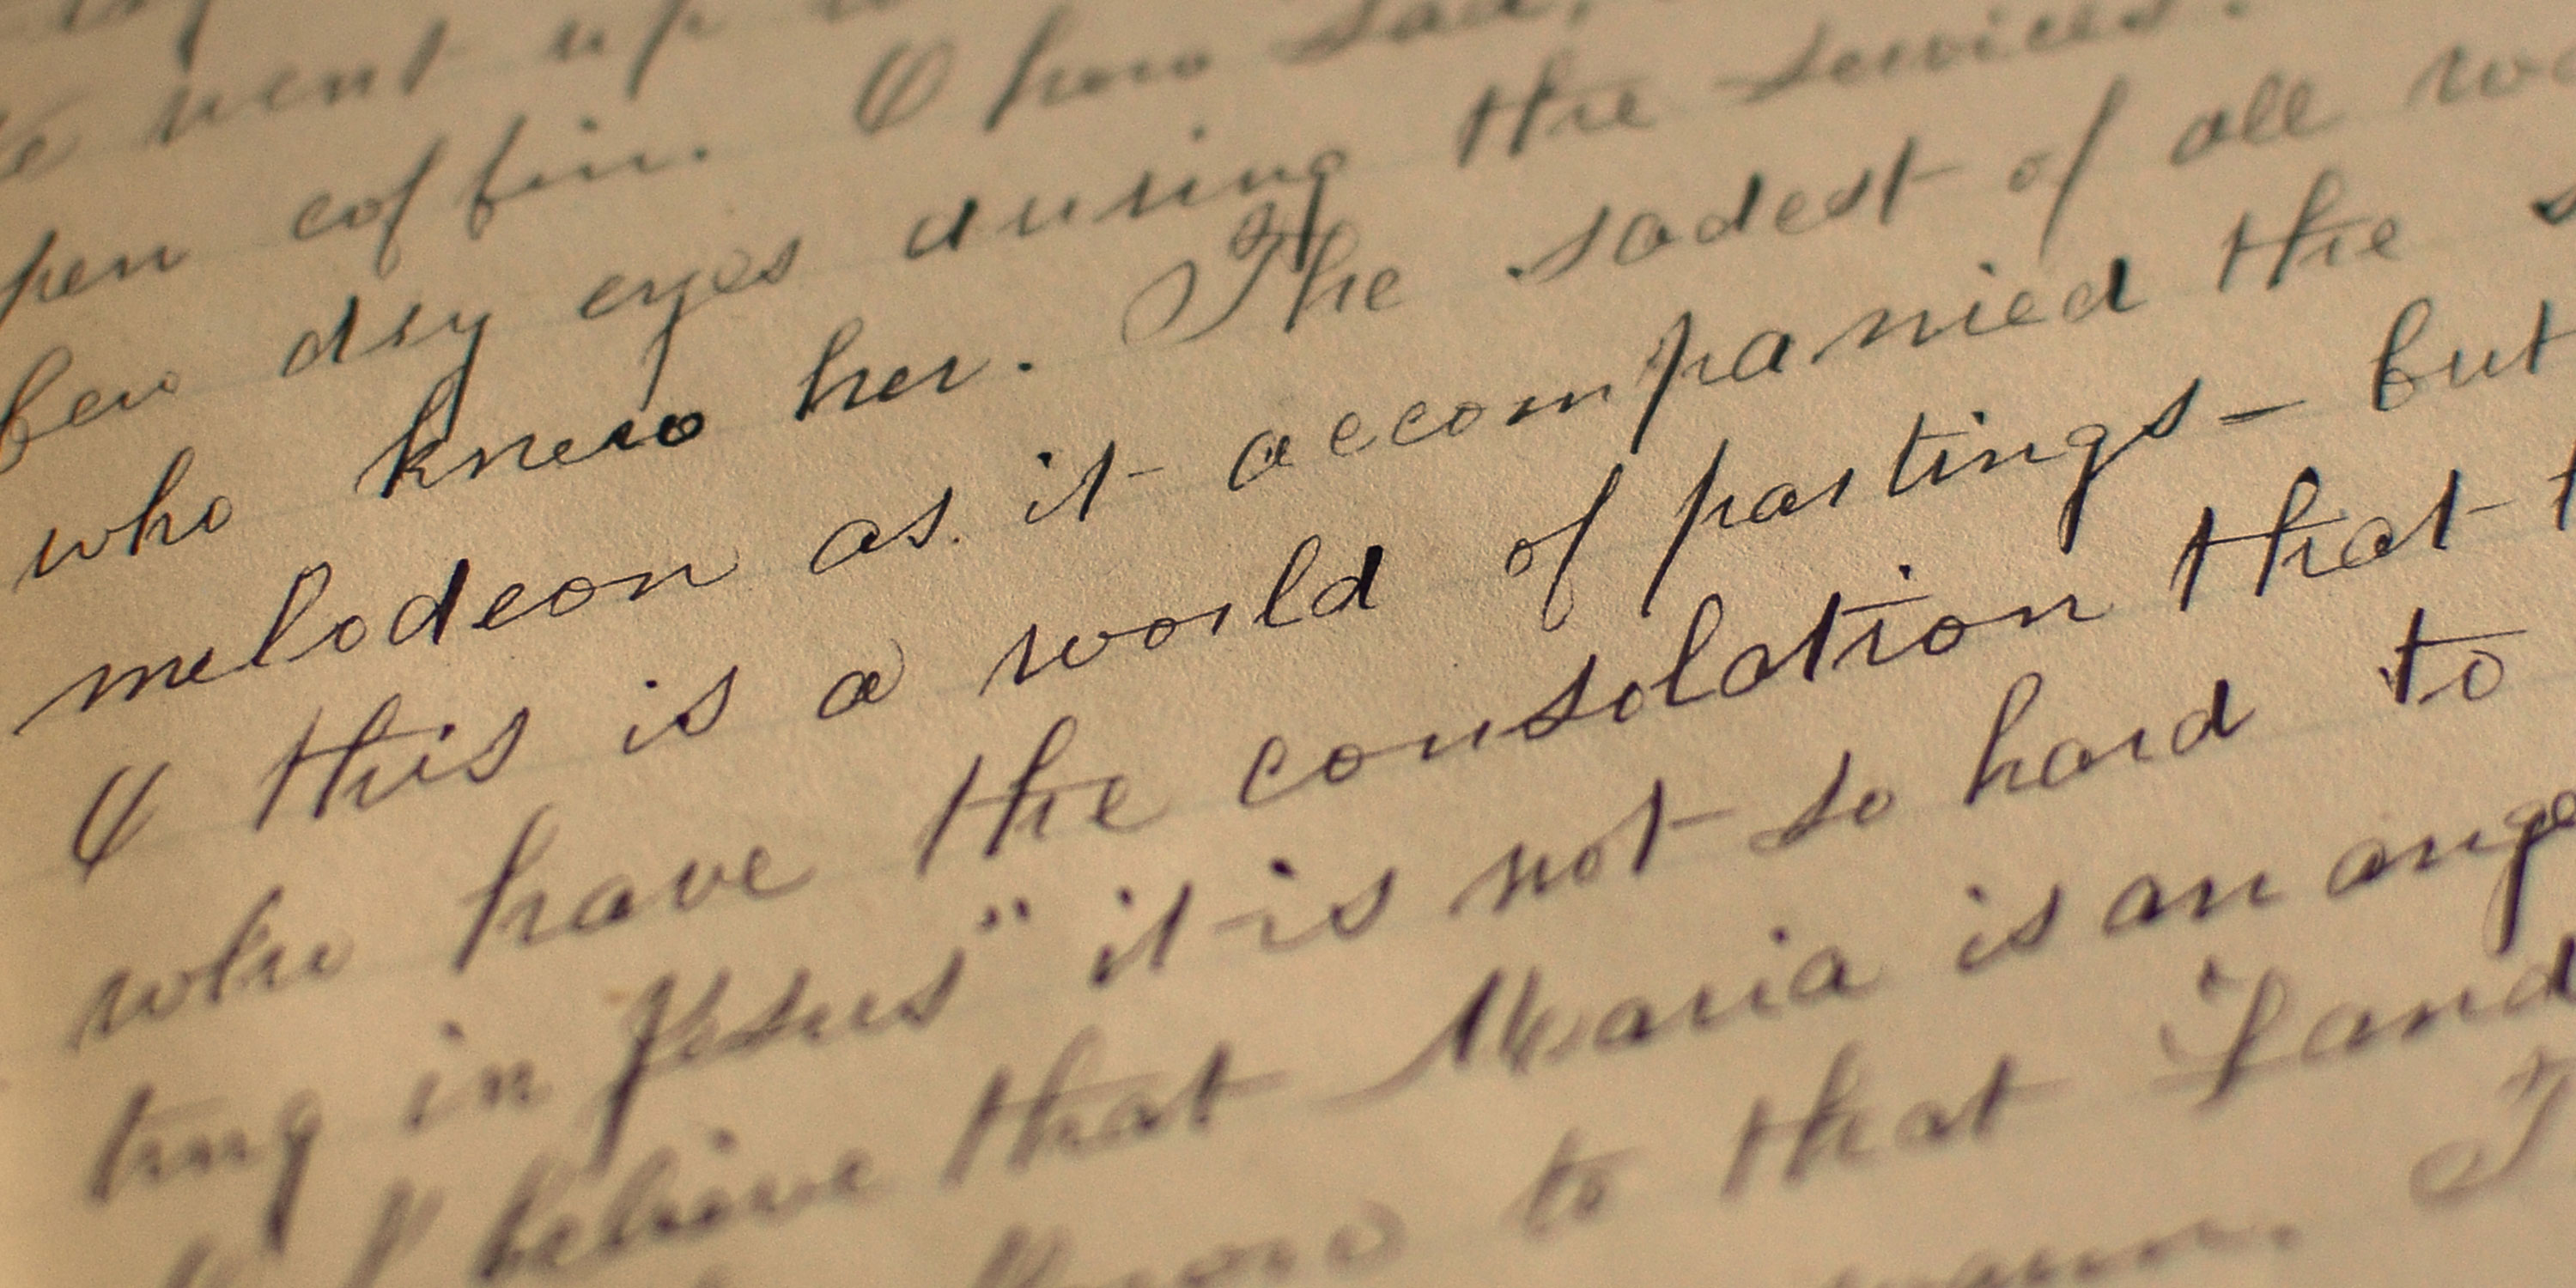 Derby diary entry with intricate cursive script